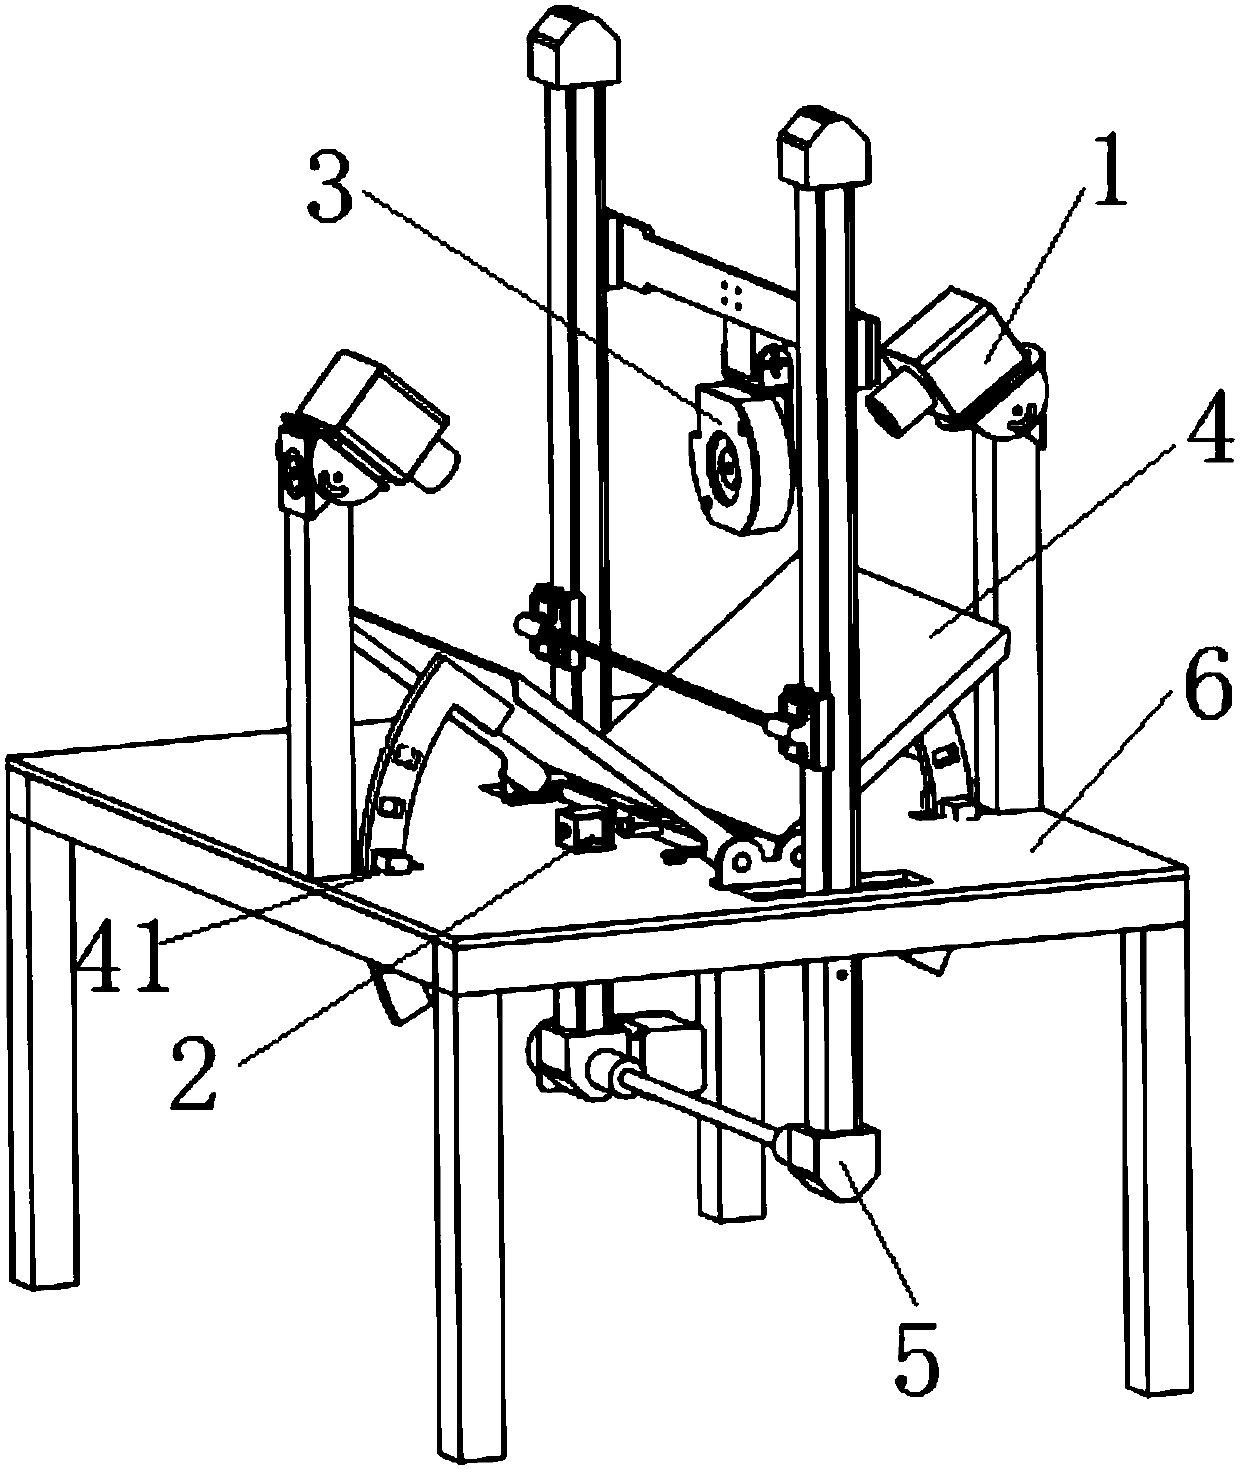 An automatic page turning device